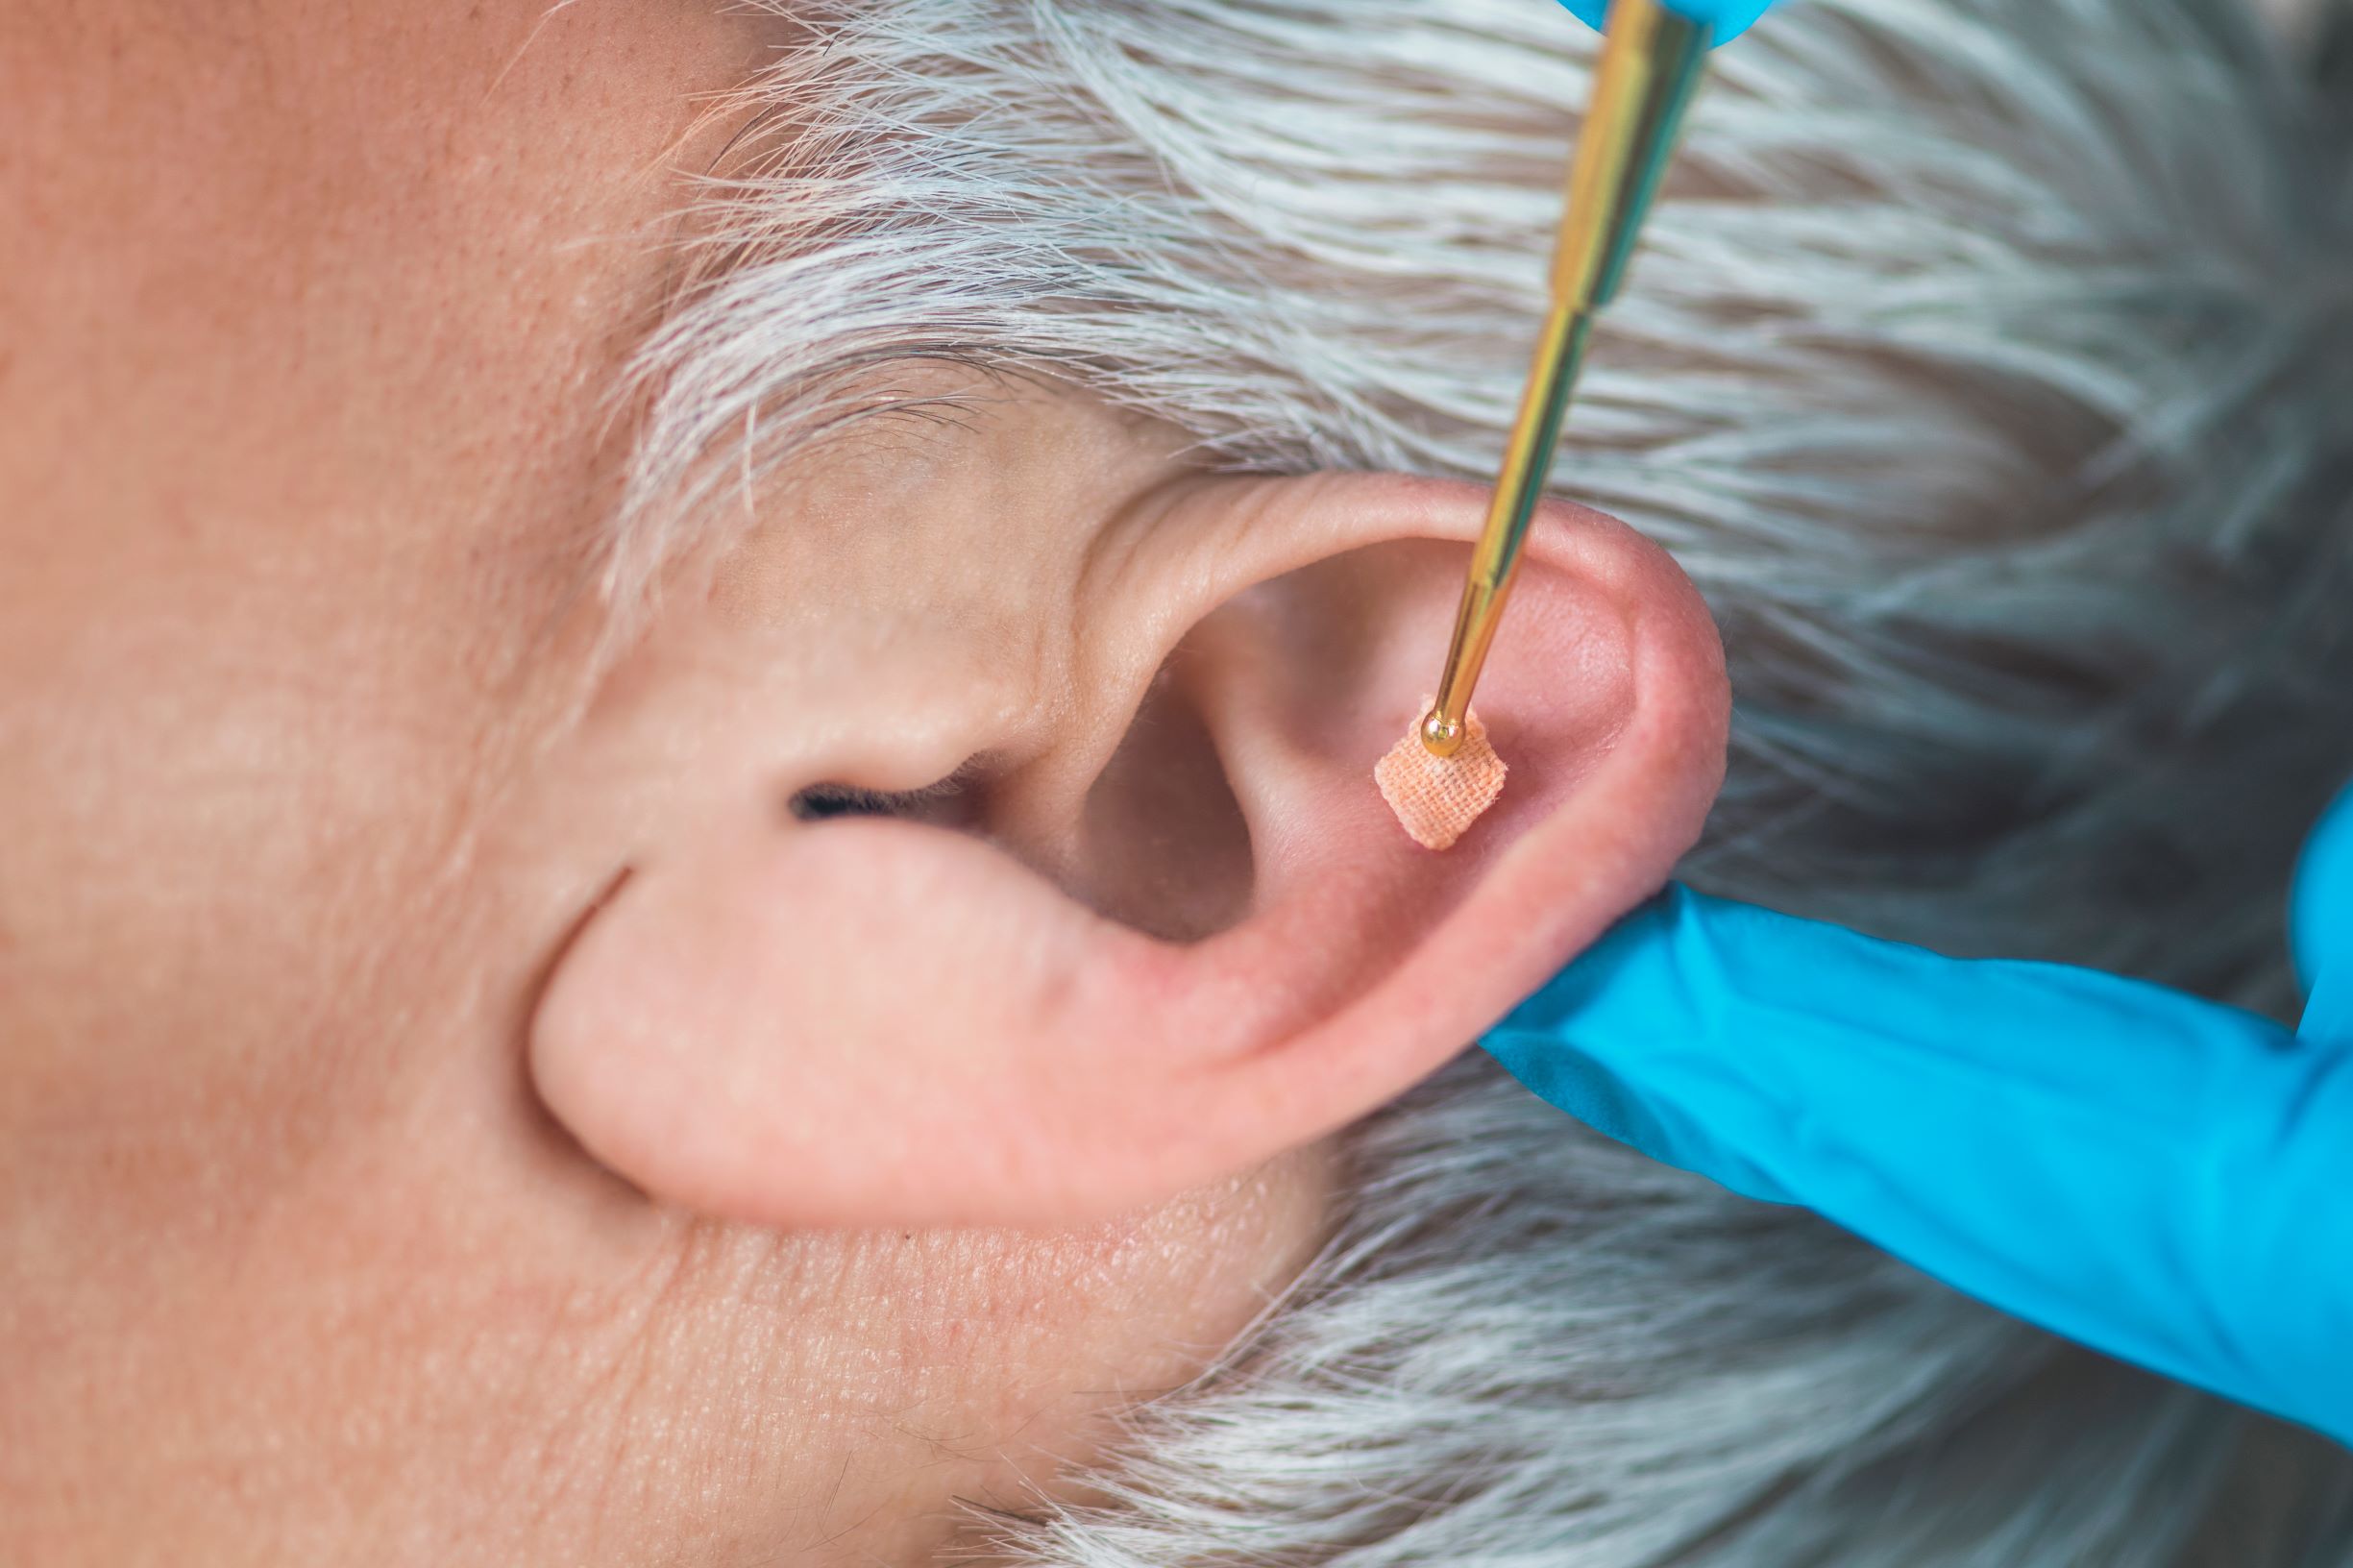 Auricular therapy for weight loss: inserting acupuncture needles in weight loss trigger points to reduce weight.